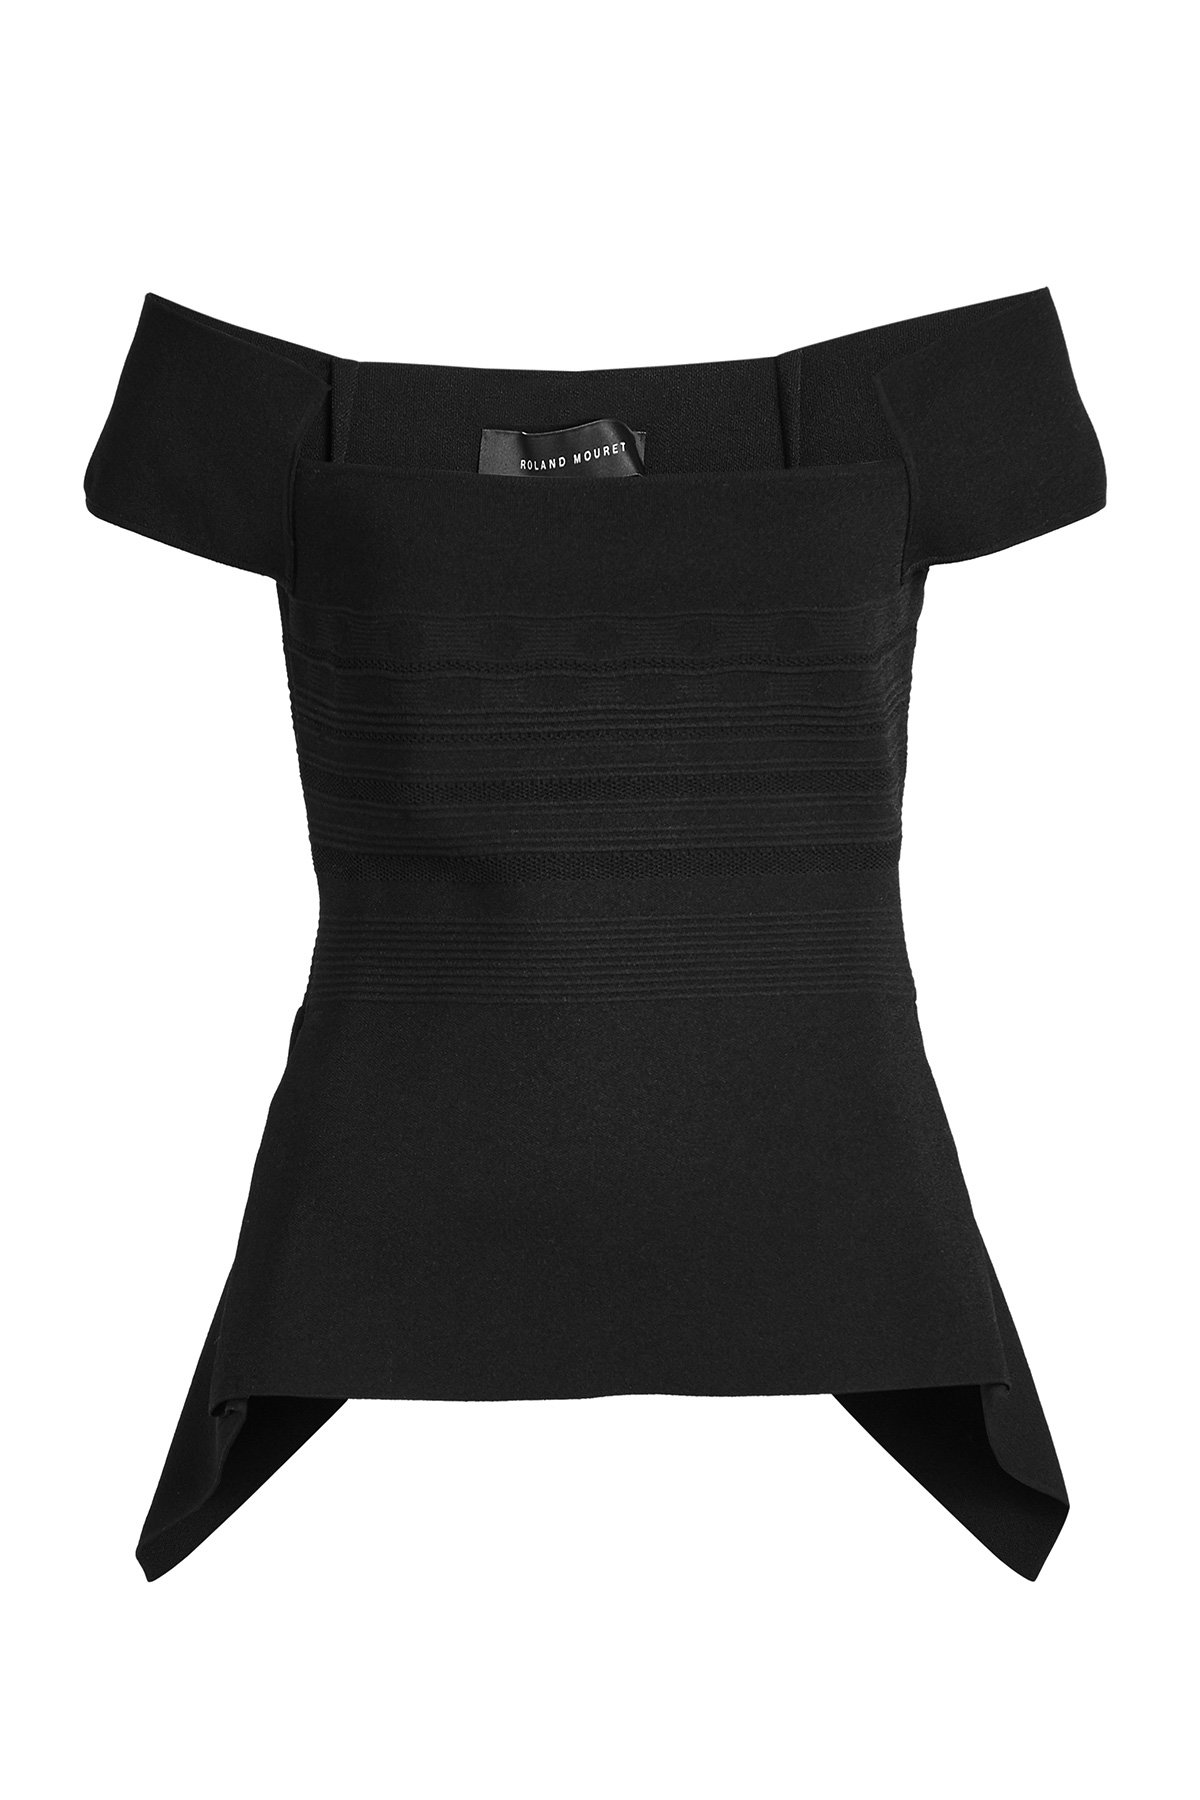 Beal Top by Roland Mouret